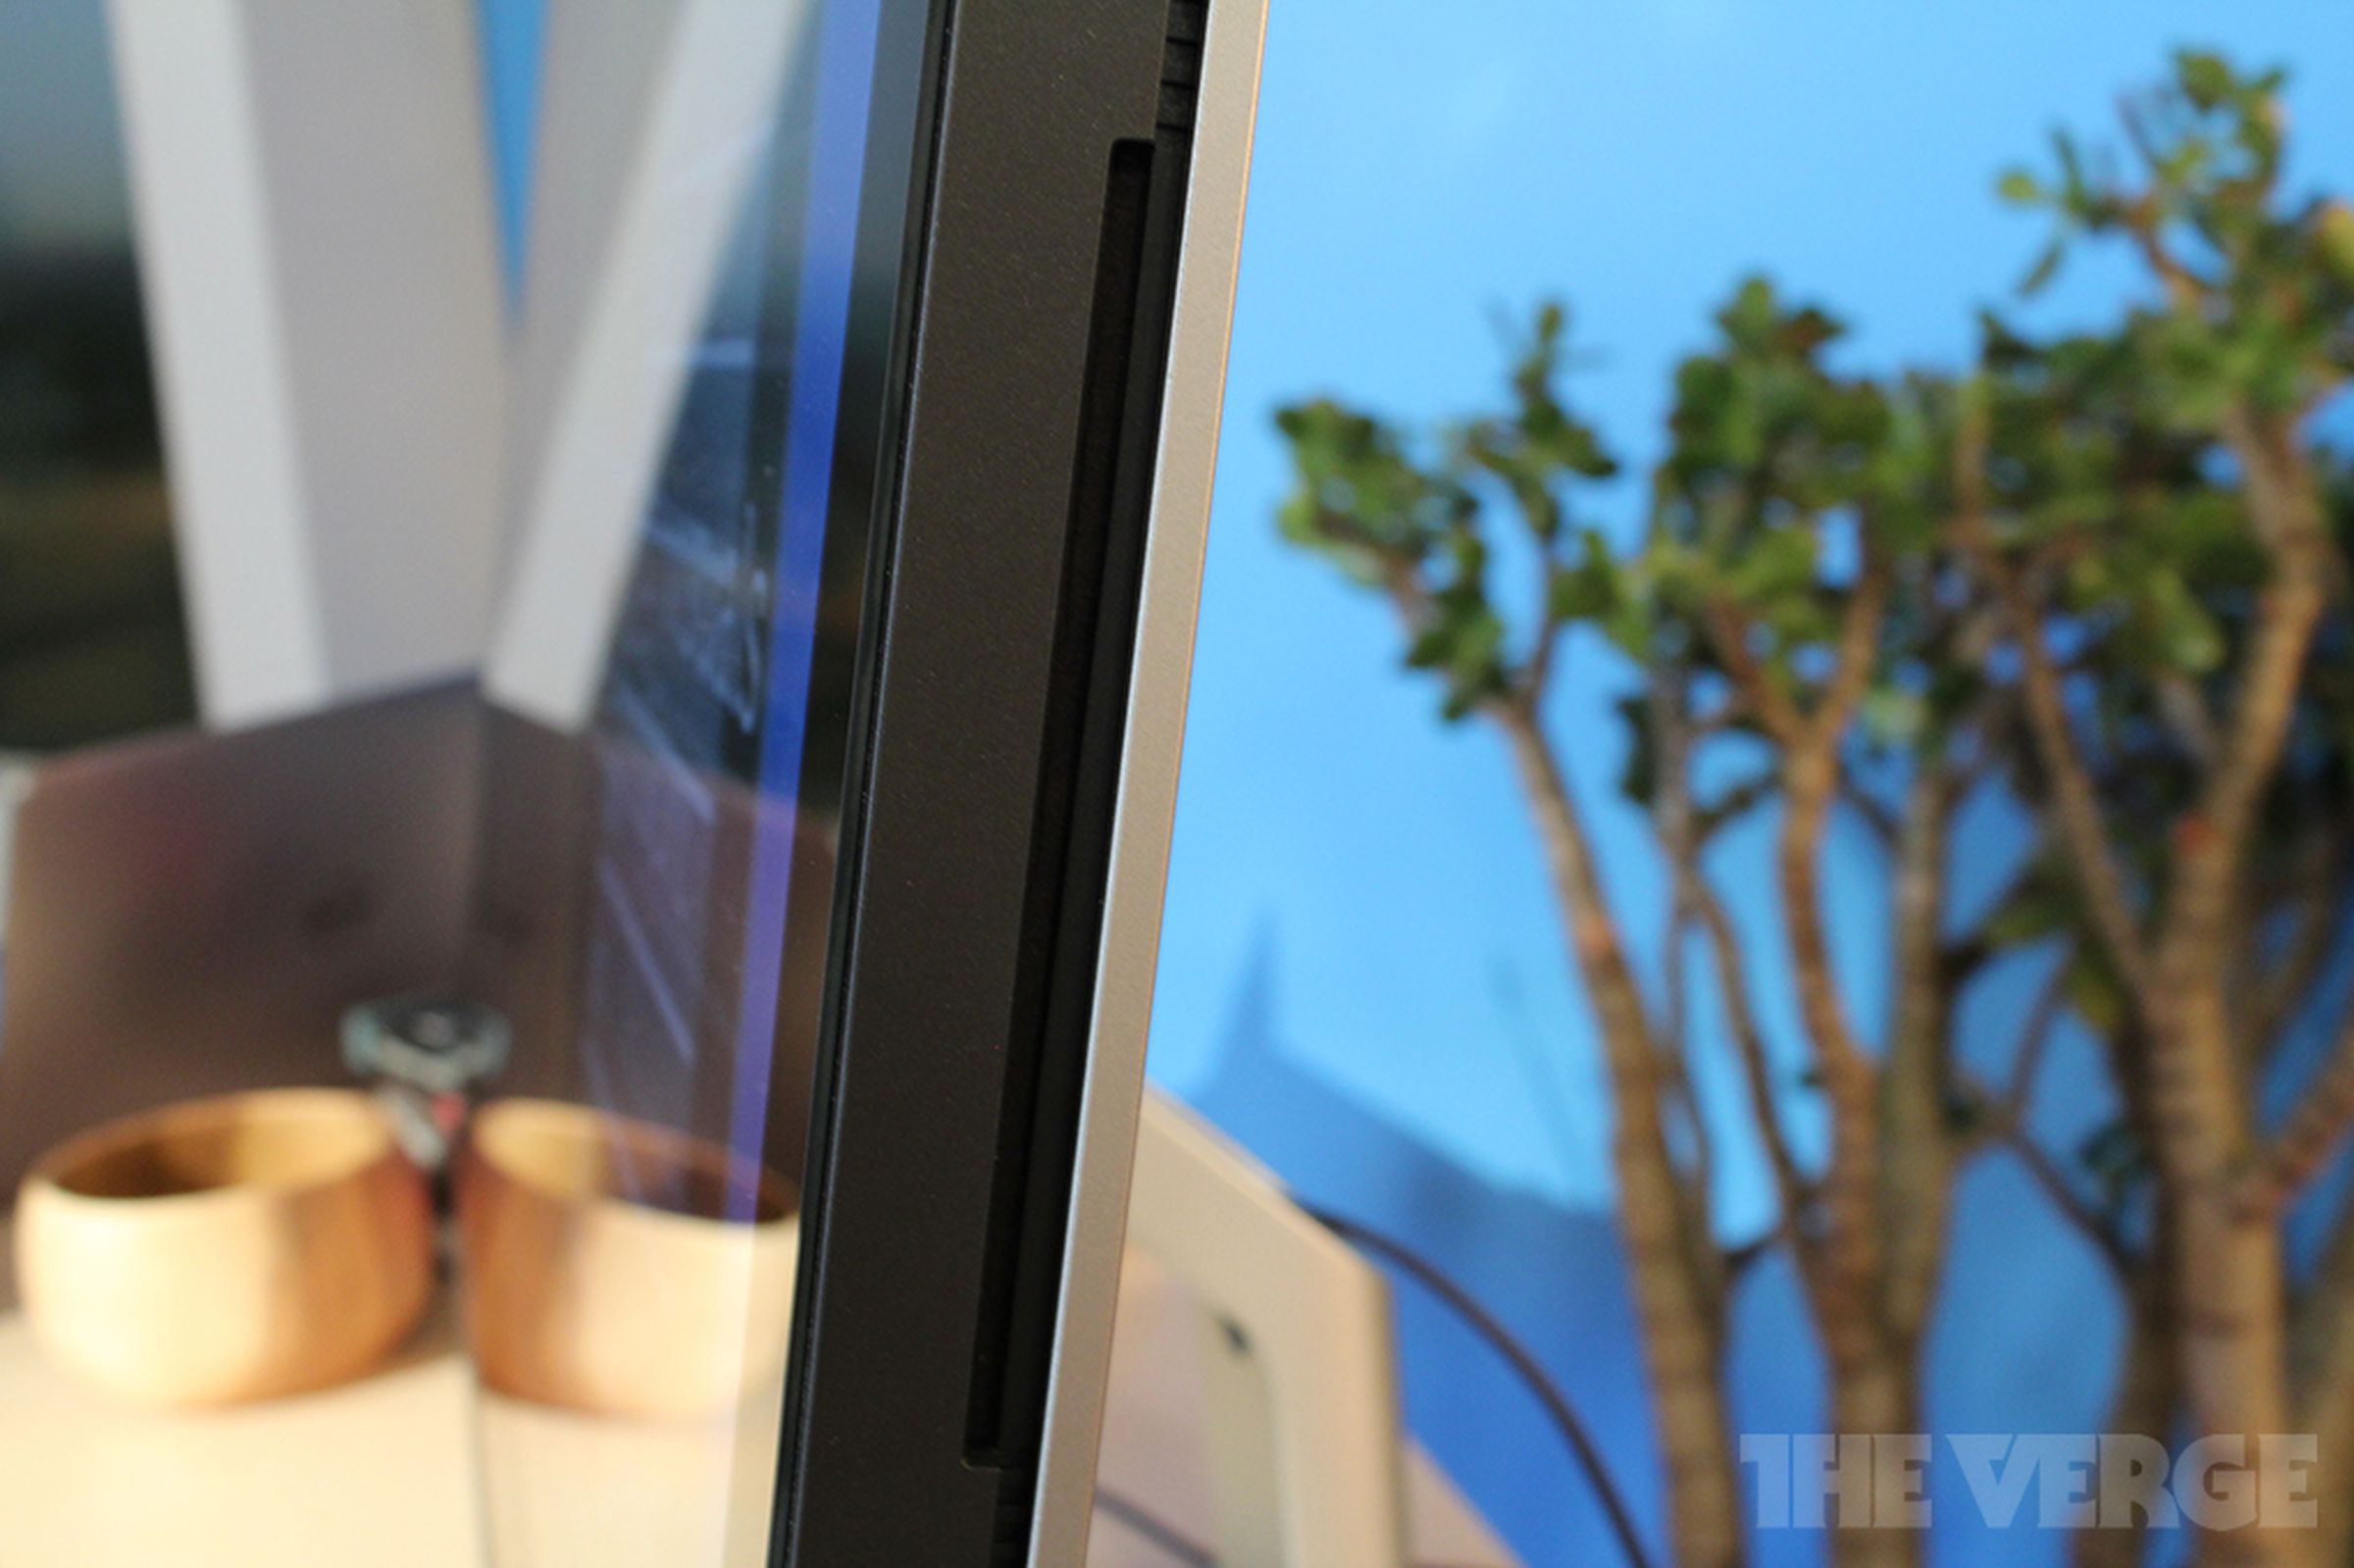 Dell XPS One 27 all-in-one hands-on photos